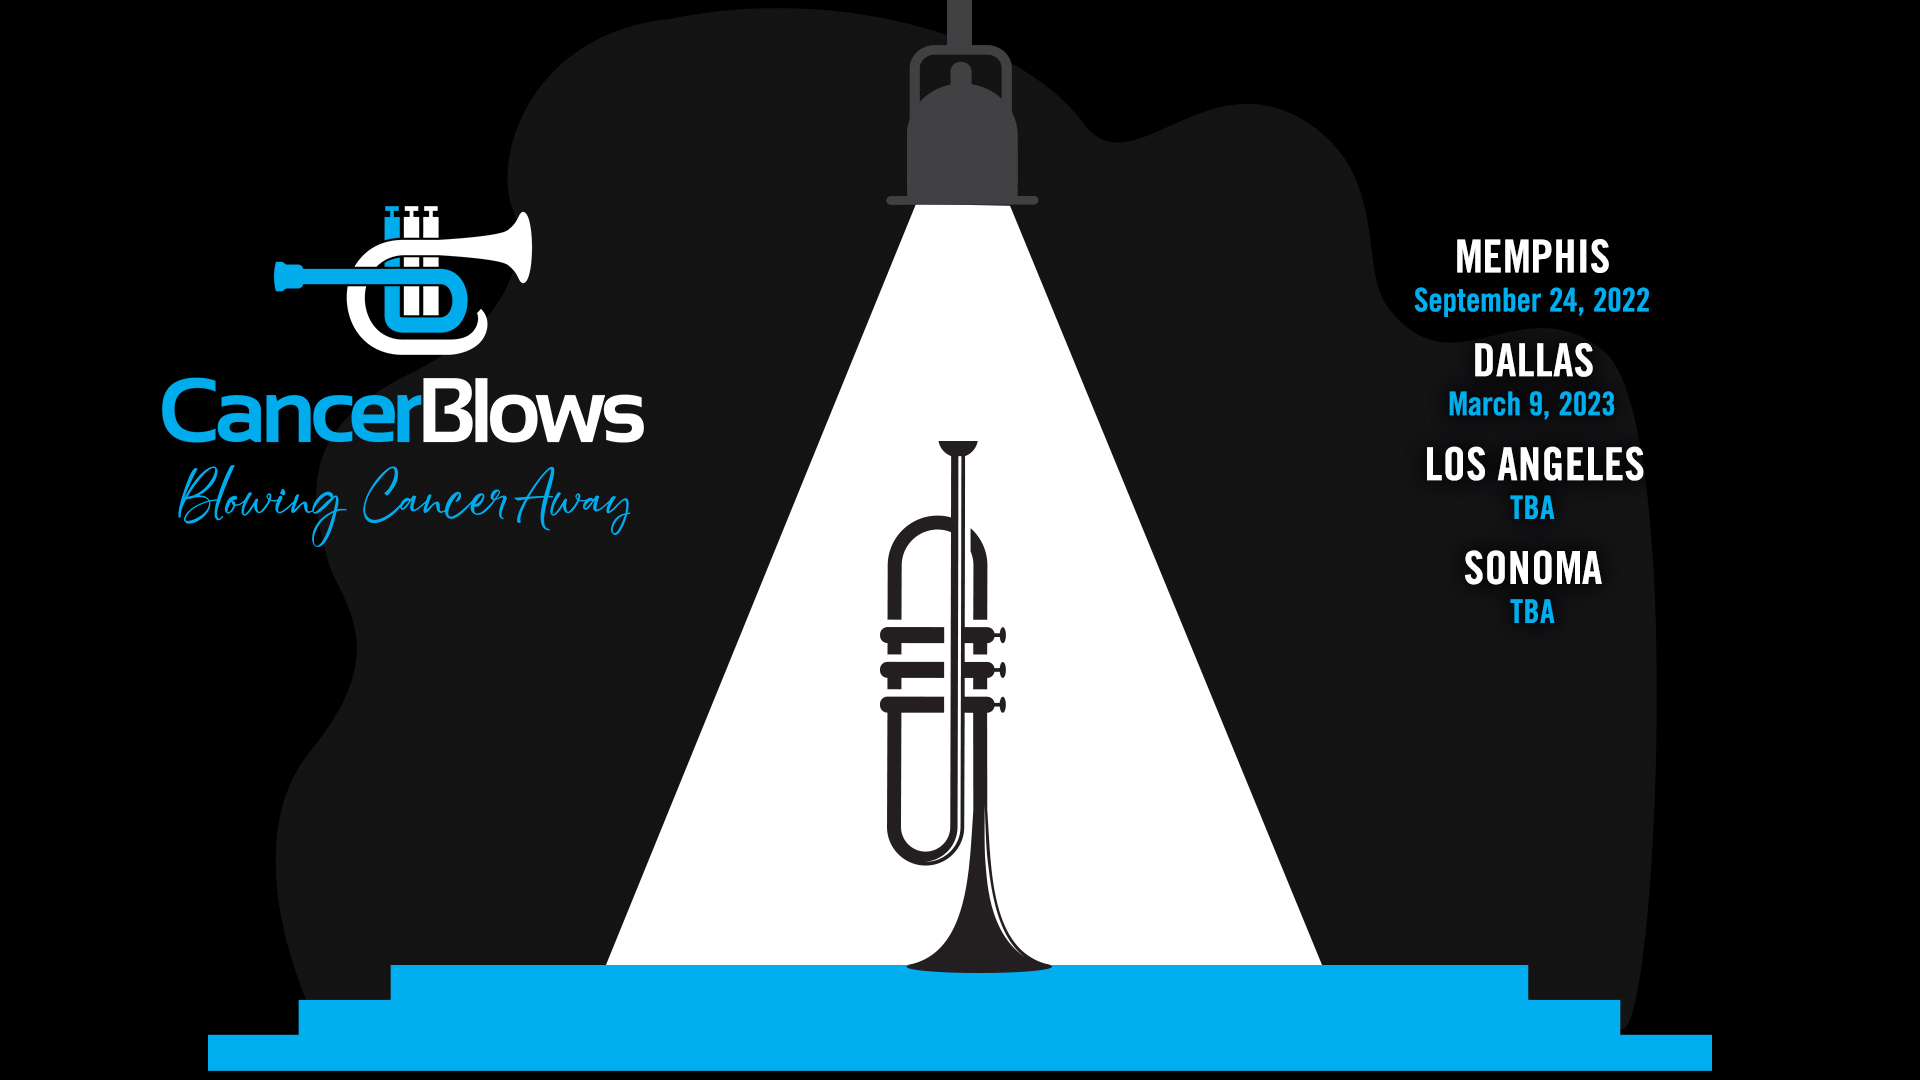 CancerBlows-Trumpet-on-Stage-teaser-dates